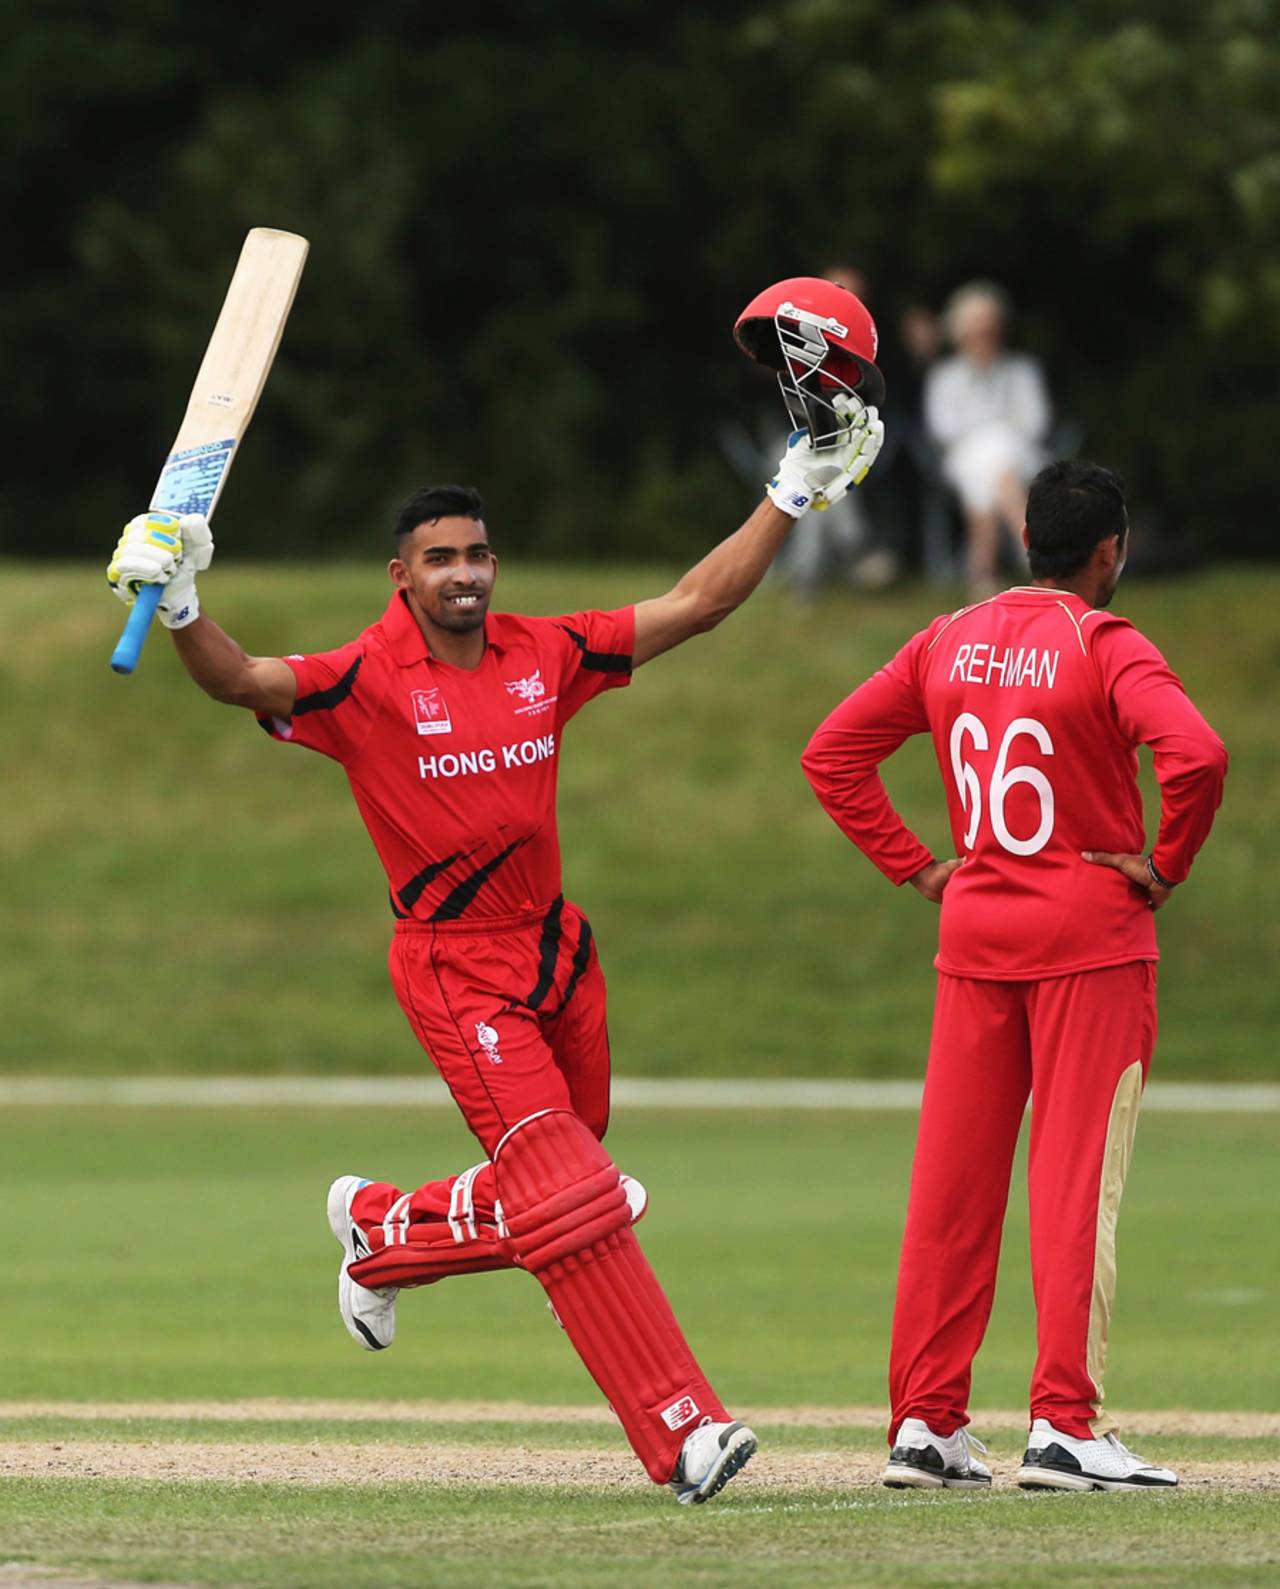 Irfan Ahmed of Hong Kong celebrates reaching his century during the ICC Cricket World Cup Qualifier match between Canada and Hong Hong at Main Power Oval in Rangiora on January 17, 2014 in Rangiora, New Zealand. (Photo by Joseph Johnson-IDI/IDI via Getty Images)